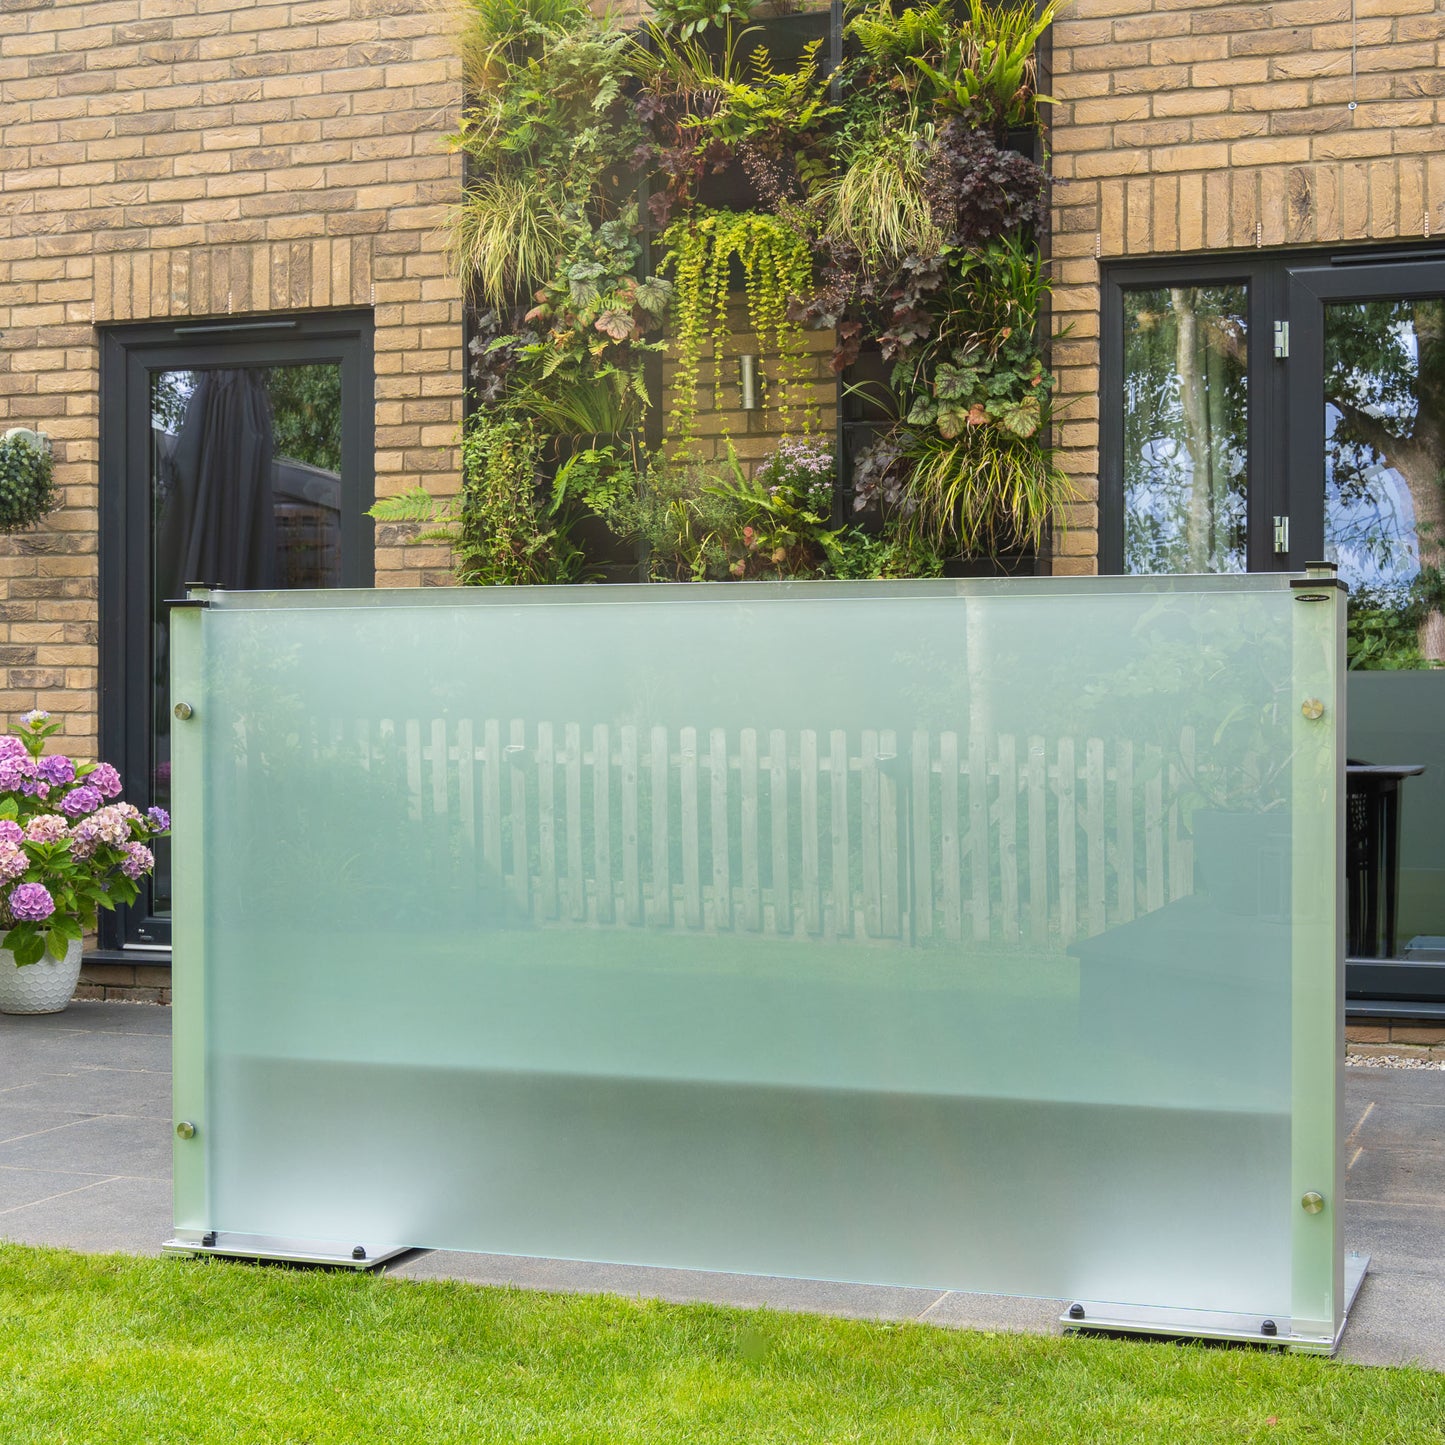 Retracted frosted glass screen with metal feet on a patio with grass border